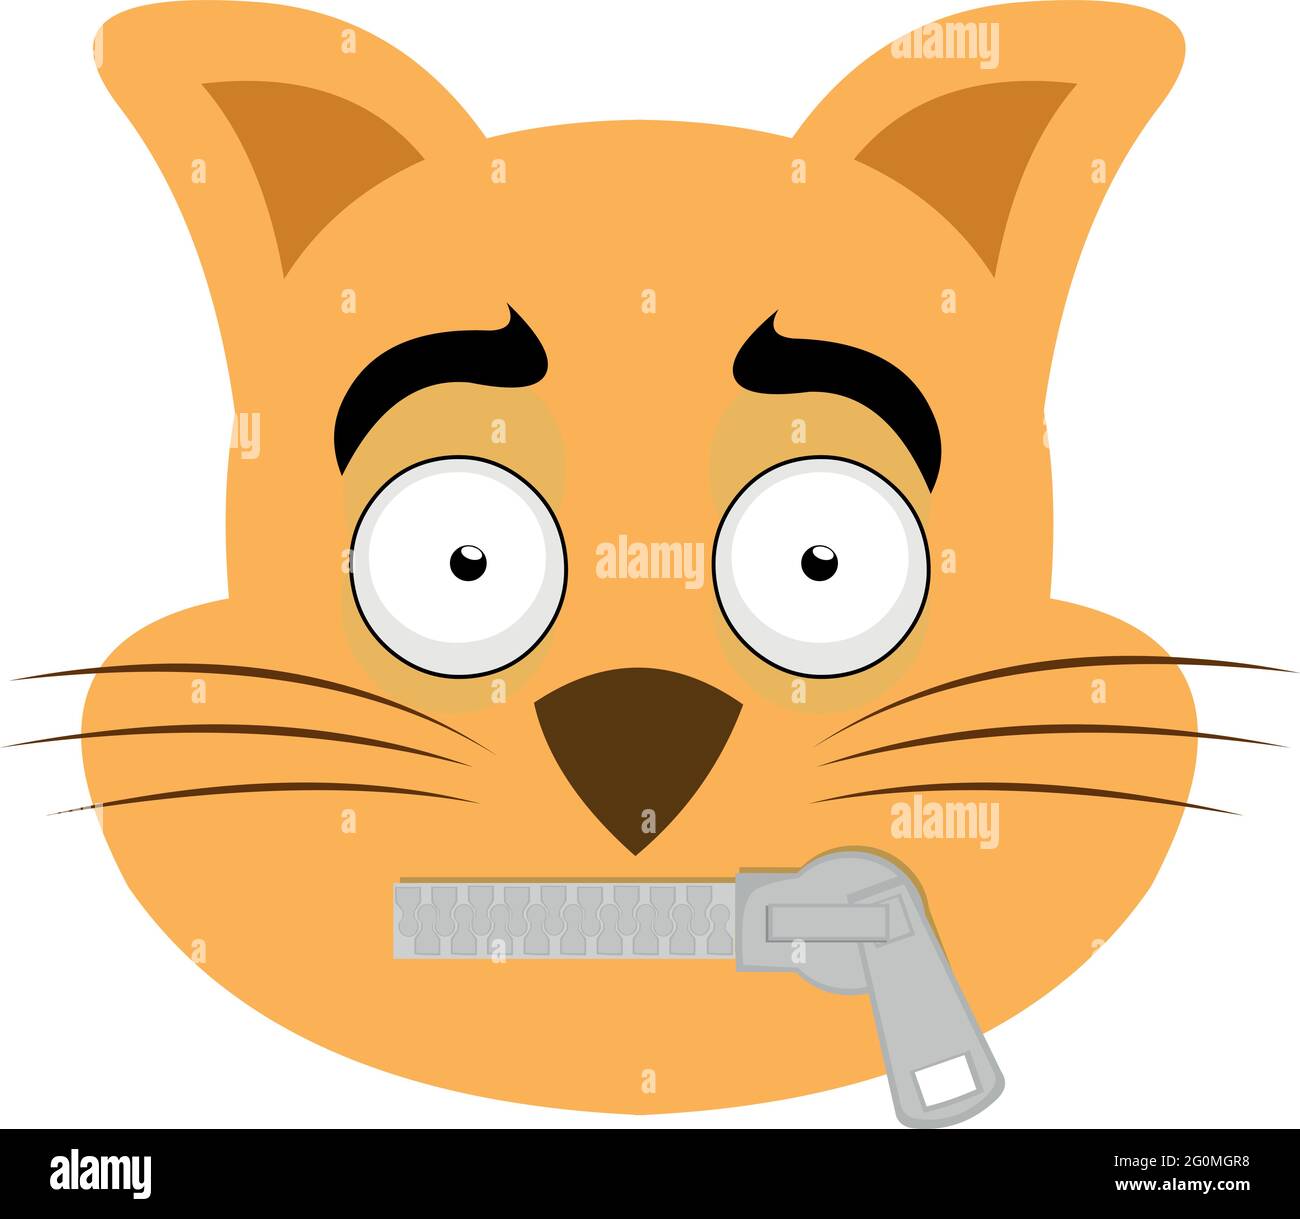 Vector emoticon illustration of a cartoon cat's face with a zipper in its mouth Stock Vector